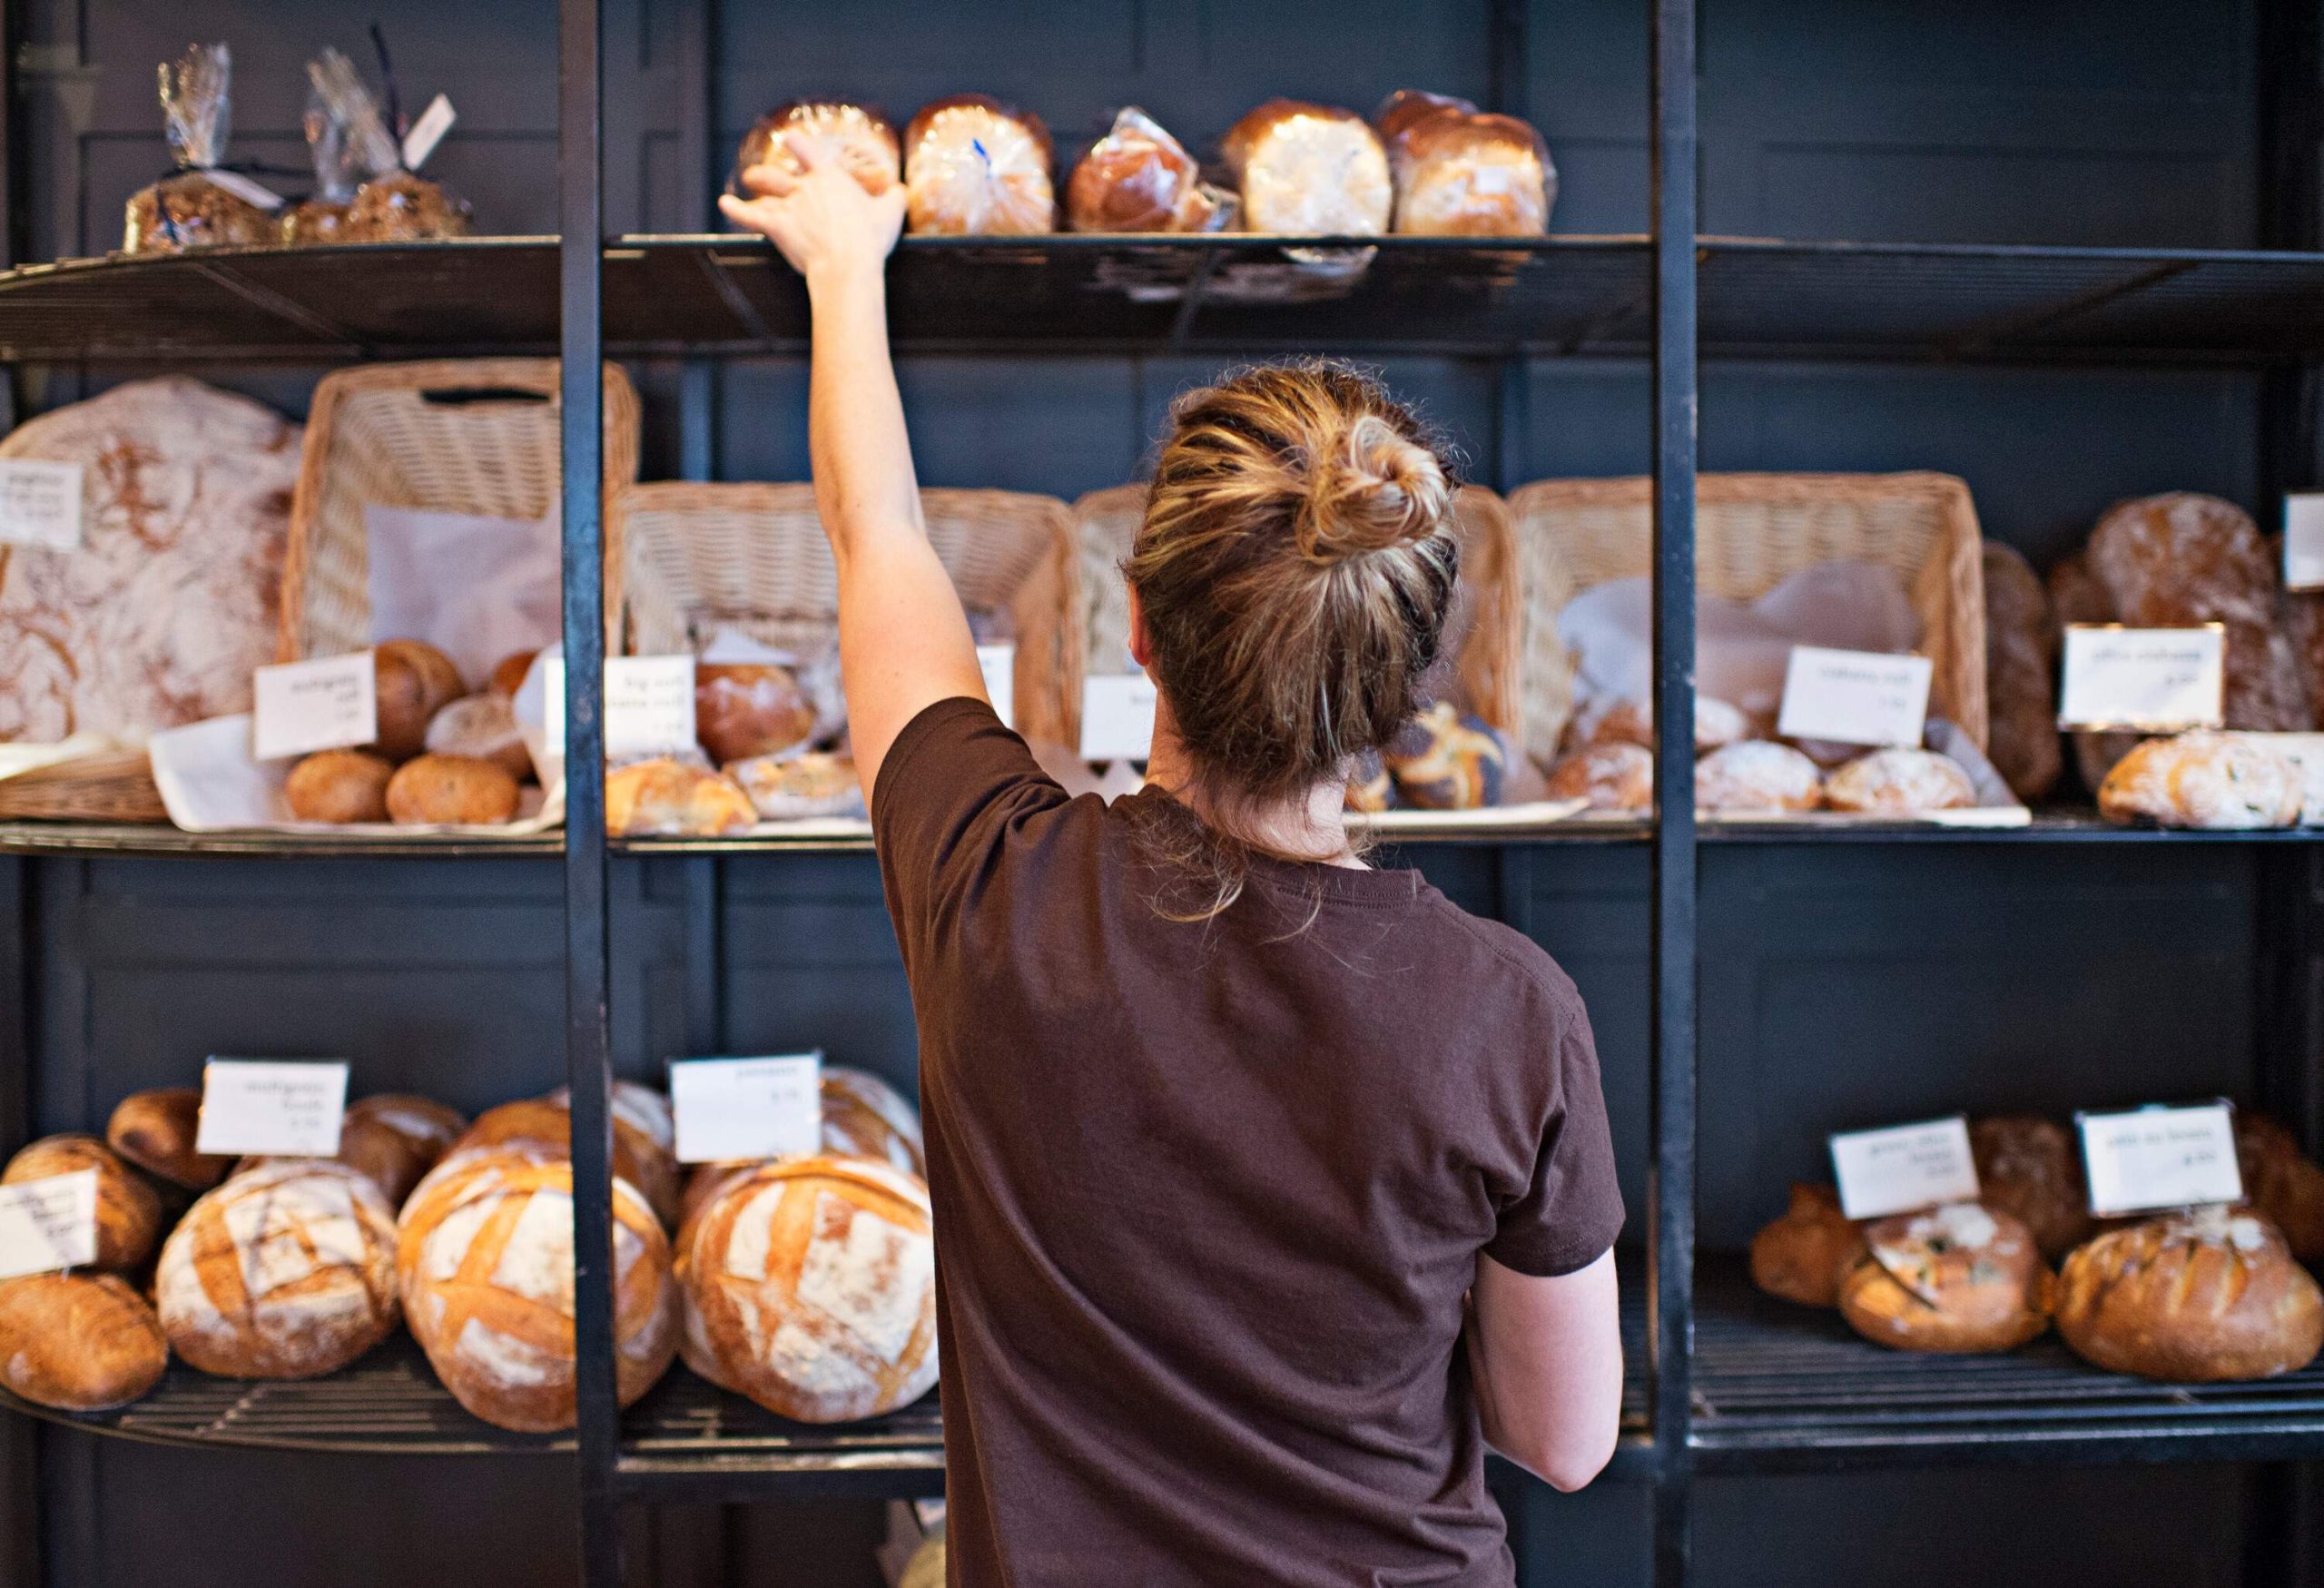 A woman fills up the shelves with baked loaves of bread.